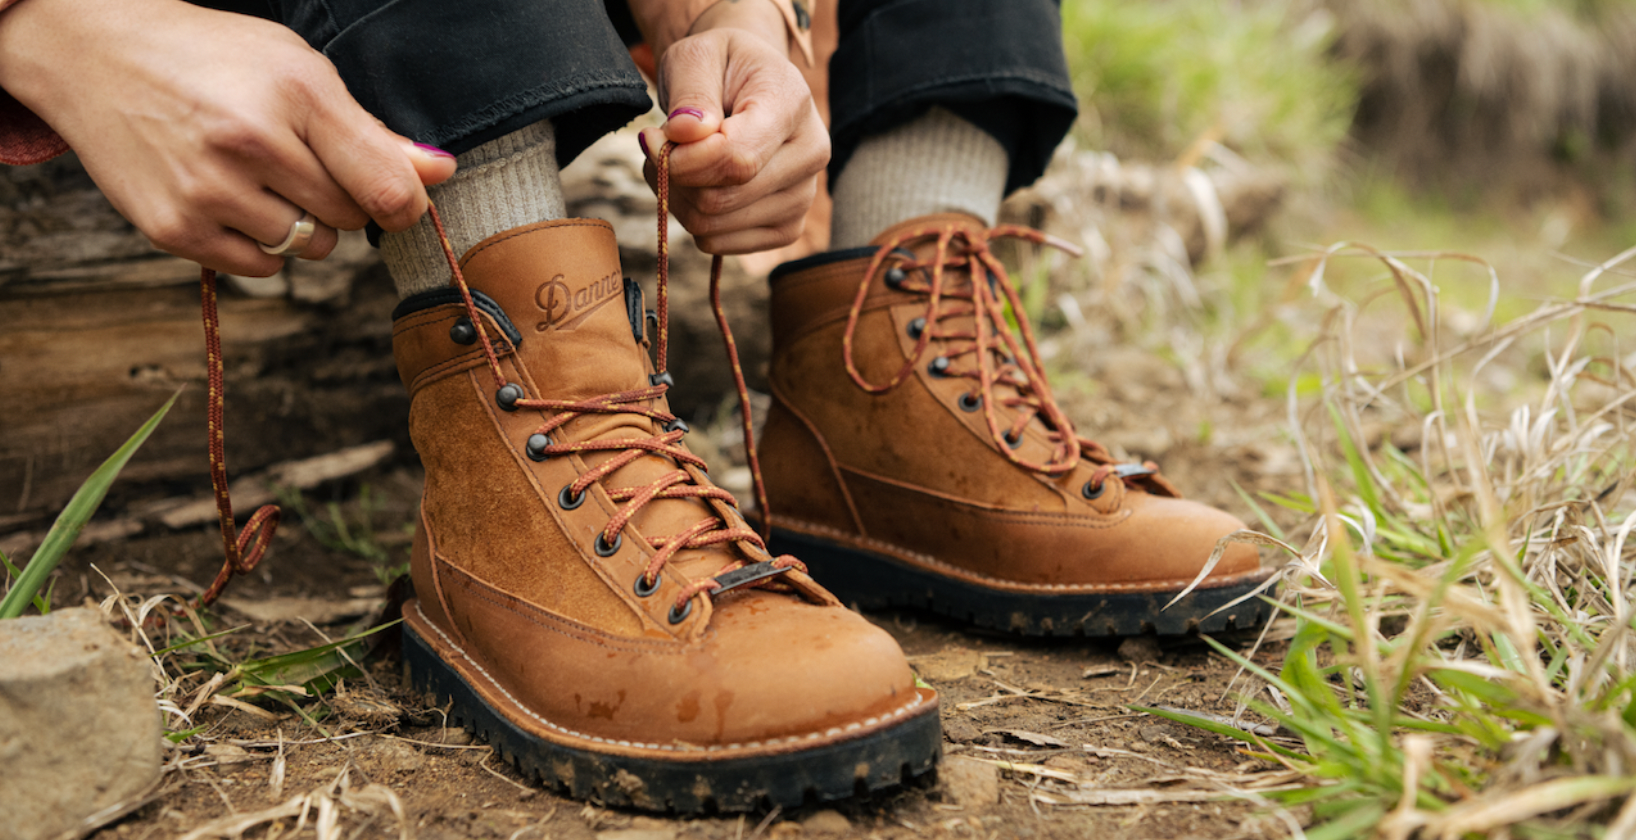 Danner Special Edition Footwear to celebrate 90 Years of Bootmaking